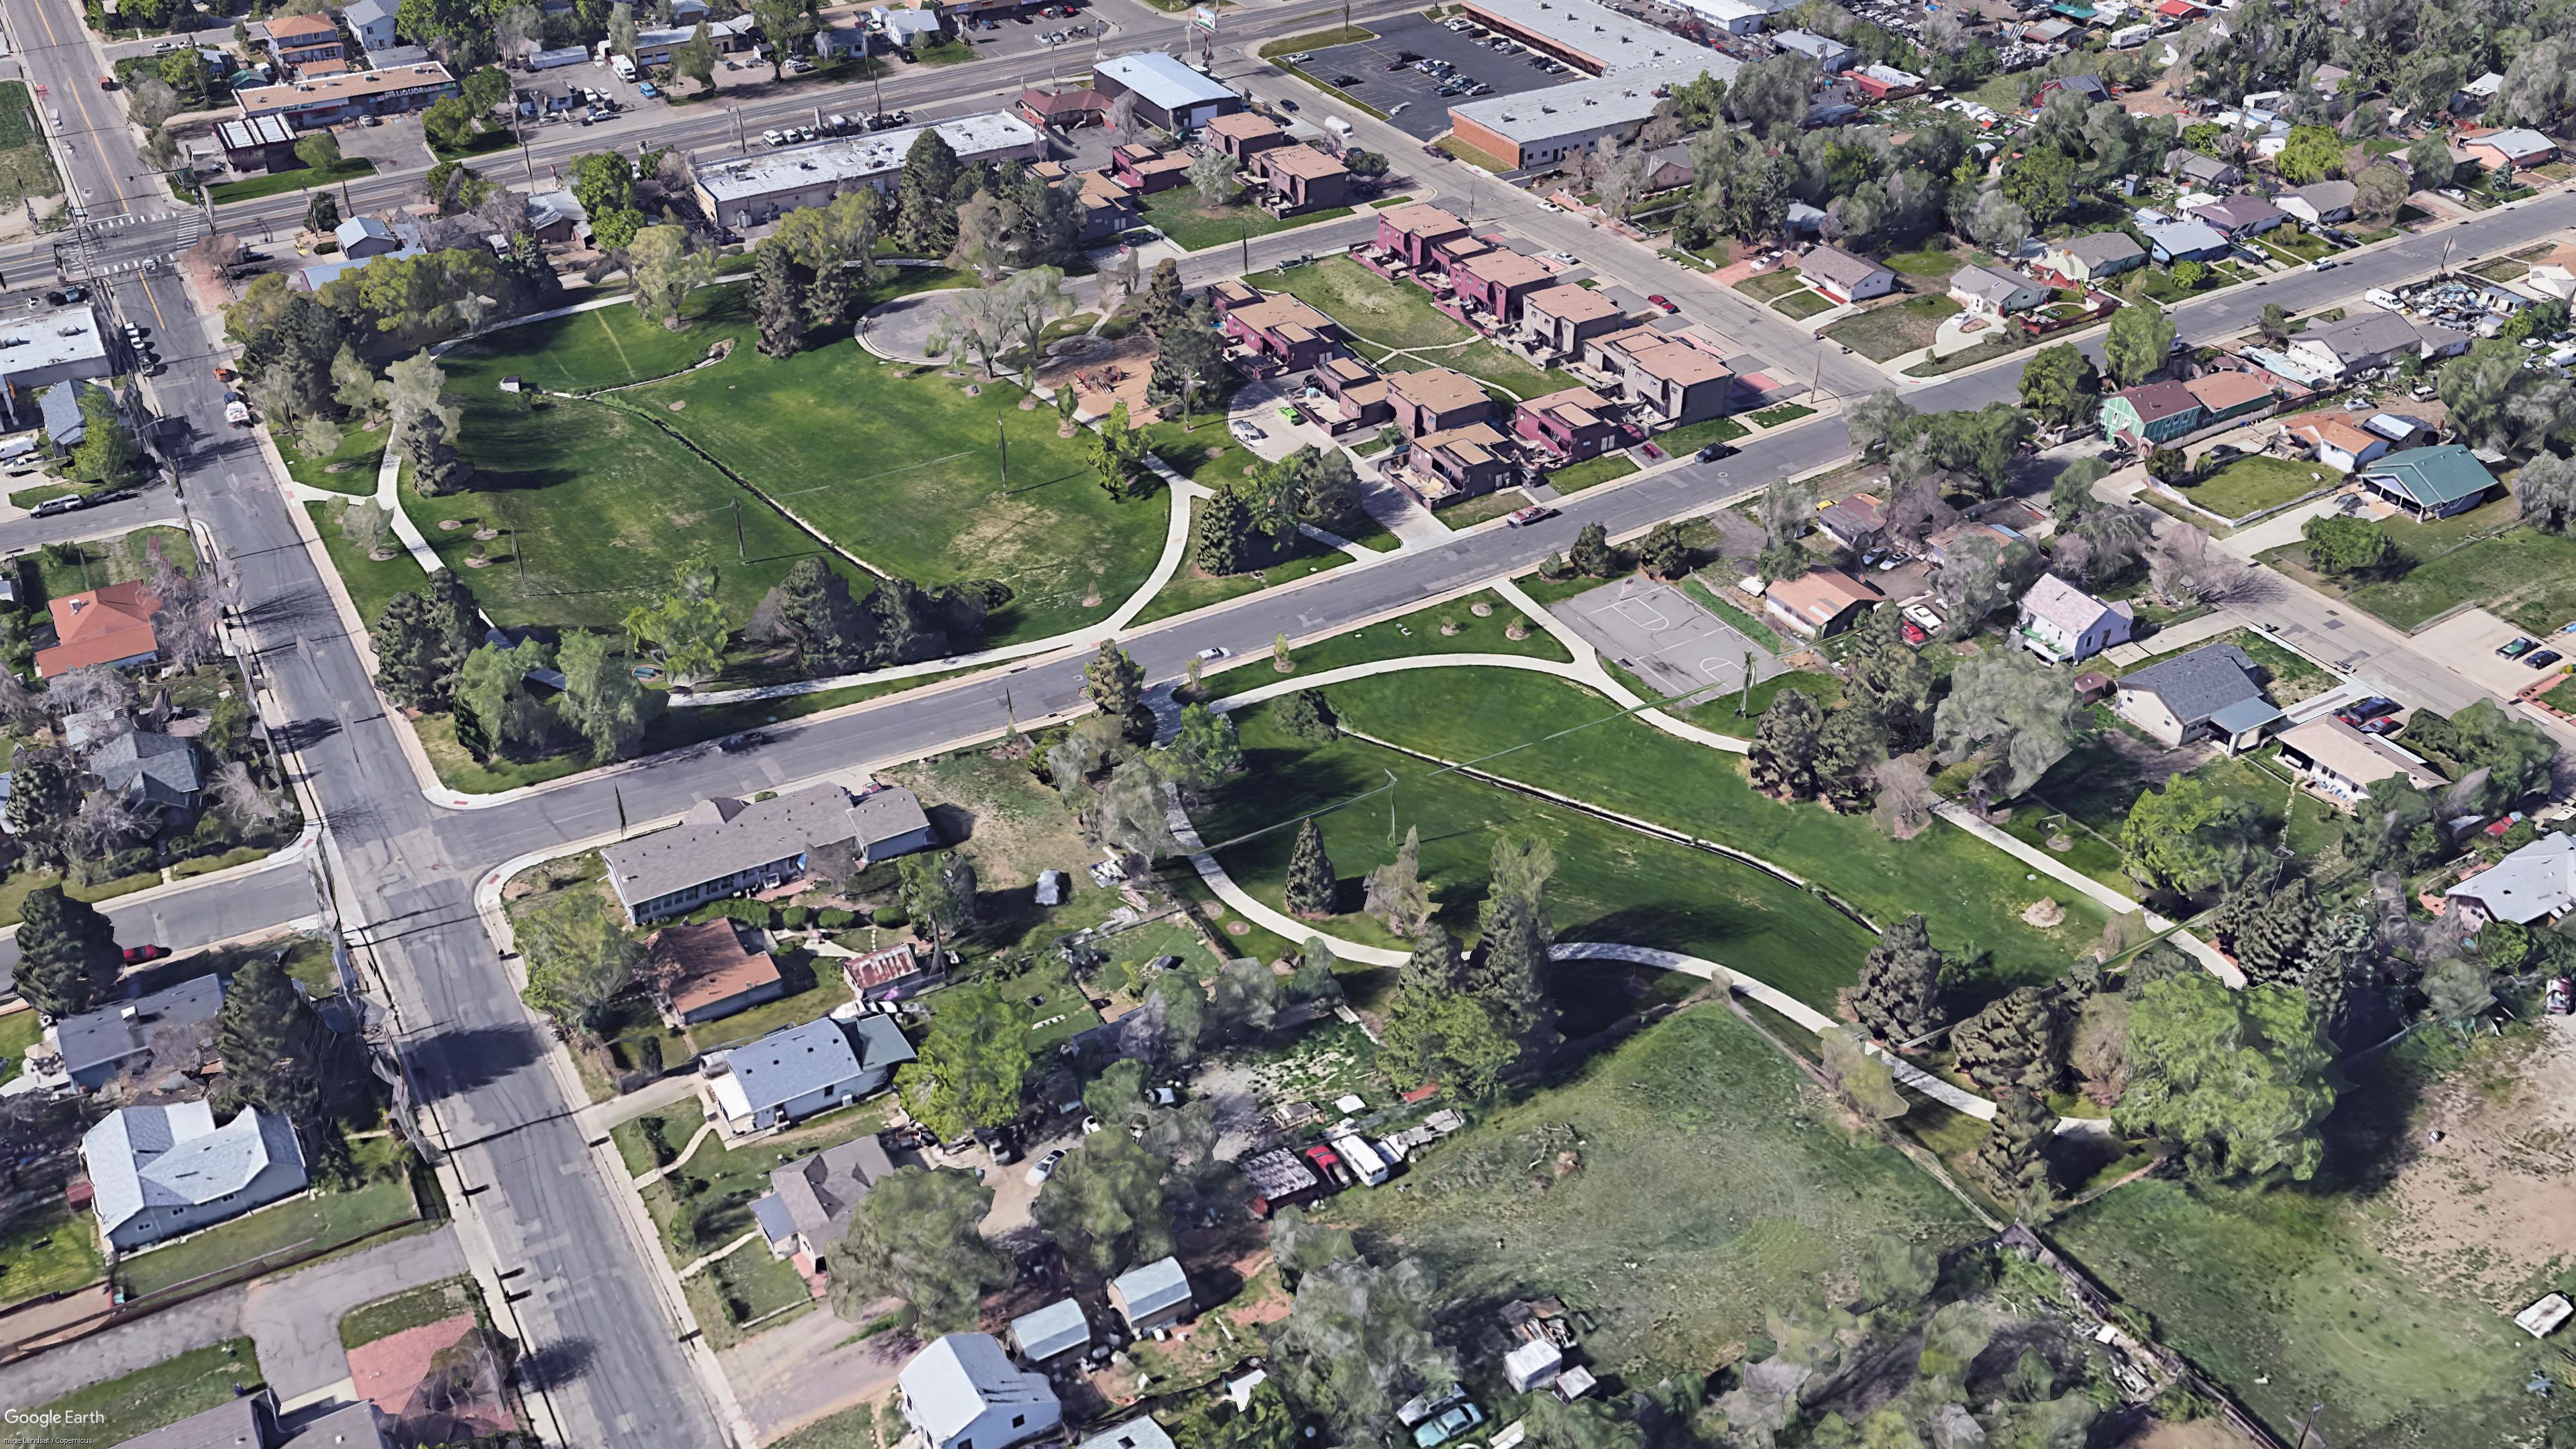 Aerial photo of a park from google images